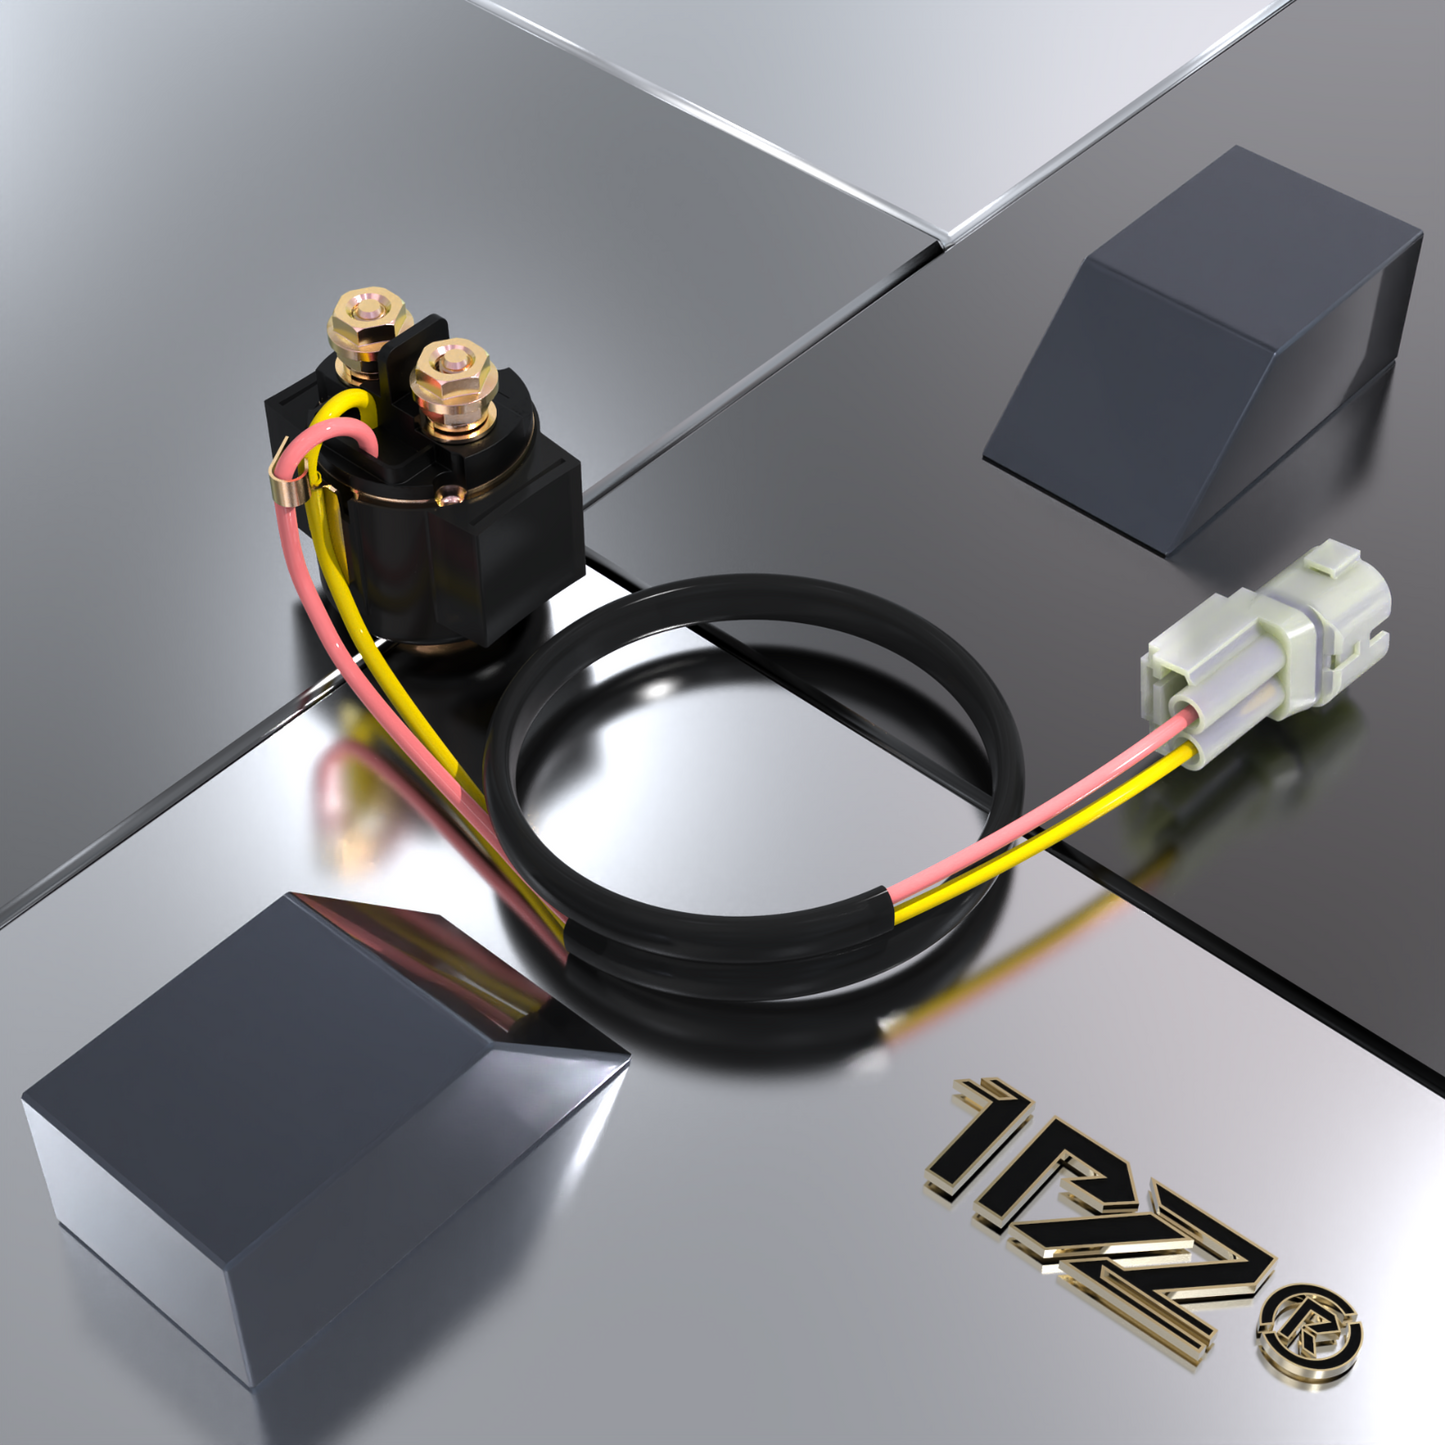 1PZ WS1-T05 Starter Solenoid Relay Replacement for Honda Fourtrax Recon 250 TRX250 TE TM 2005-2020 35850-HM8-B00